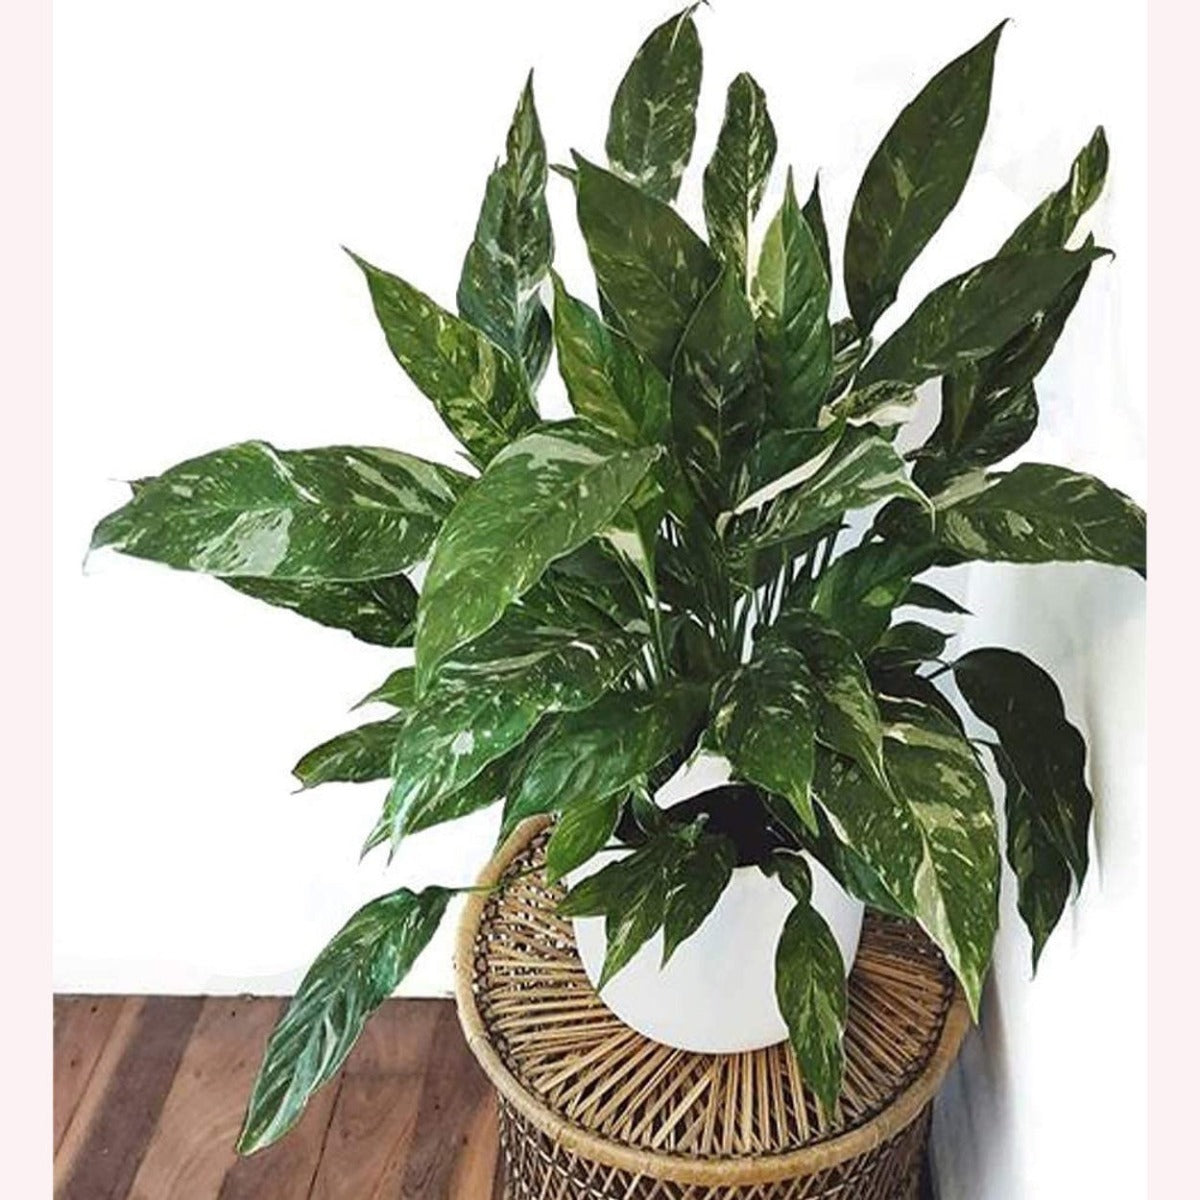 Variegated Spathiphyllum Domino Peace Lily, 6" Pot